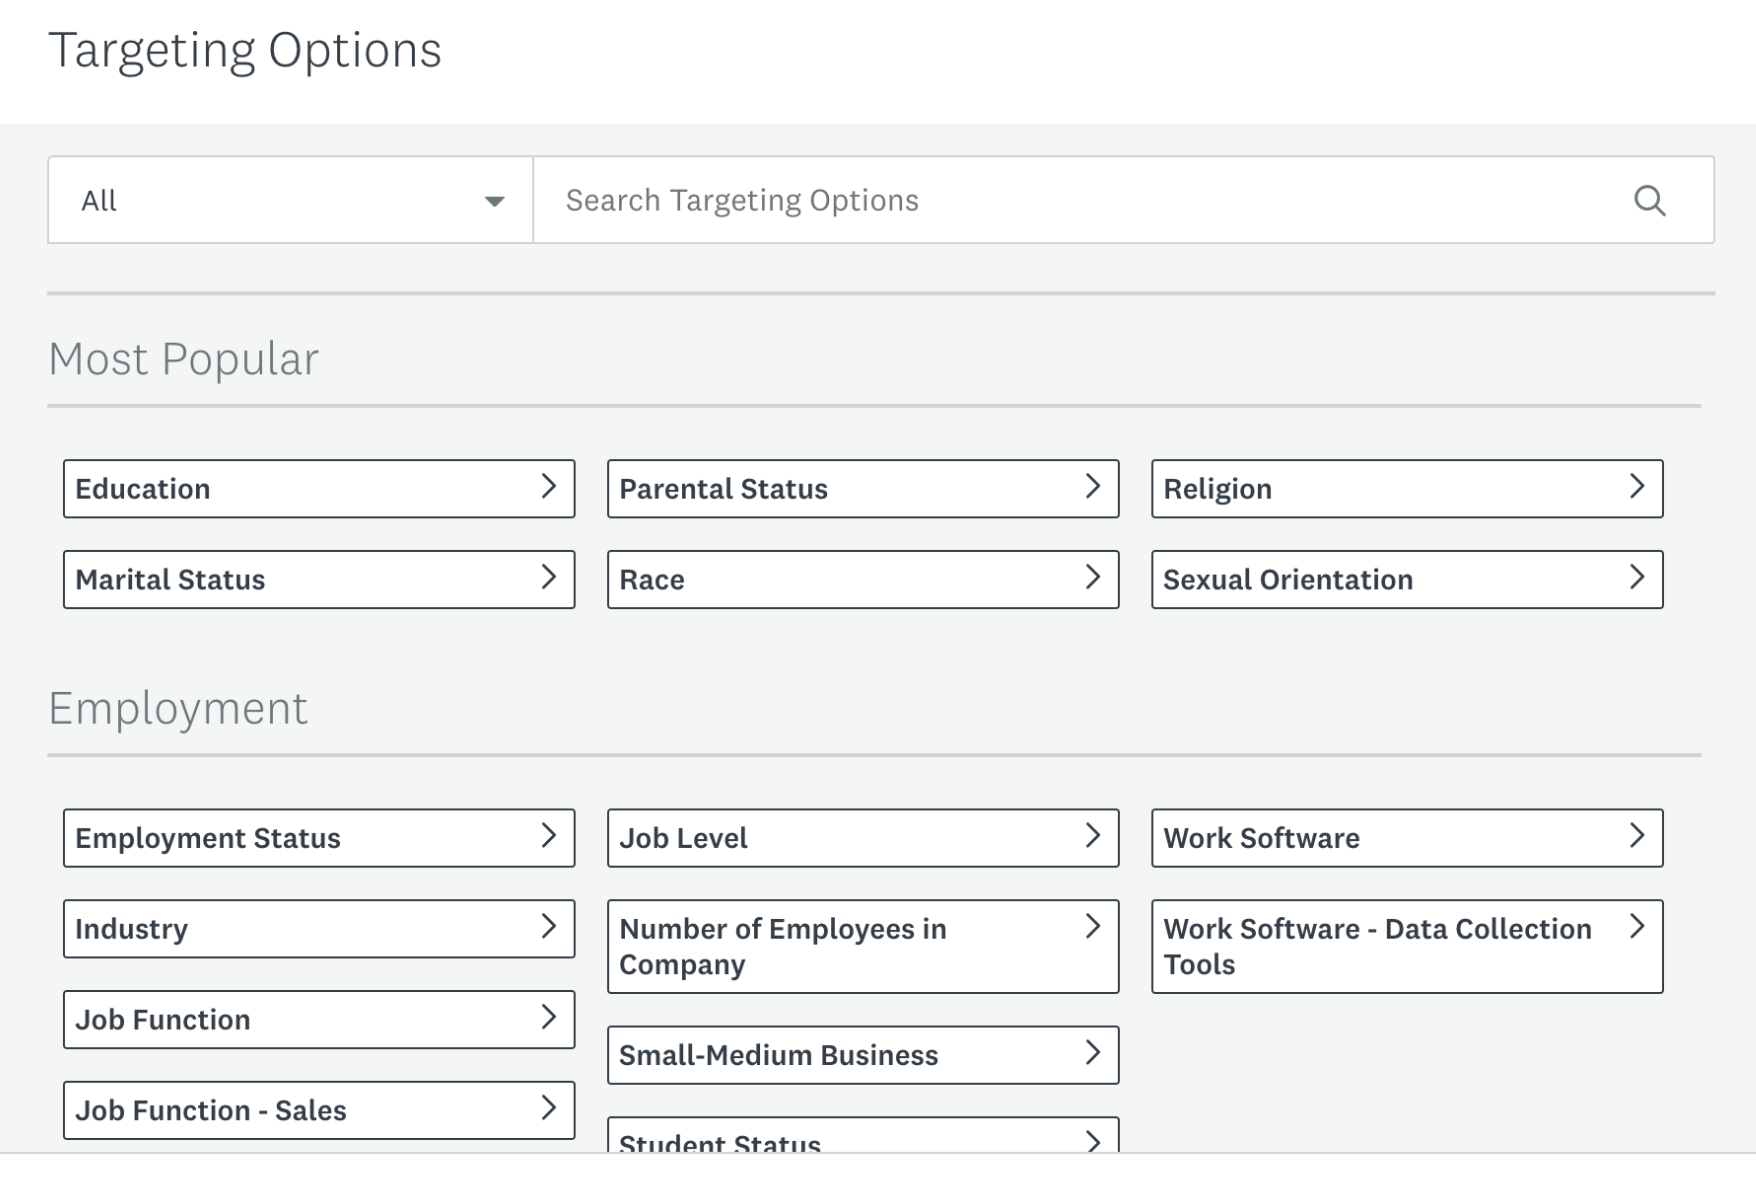 This is very small portion of SurveyMonkey audience targeting options